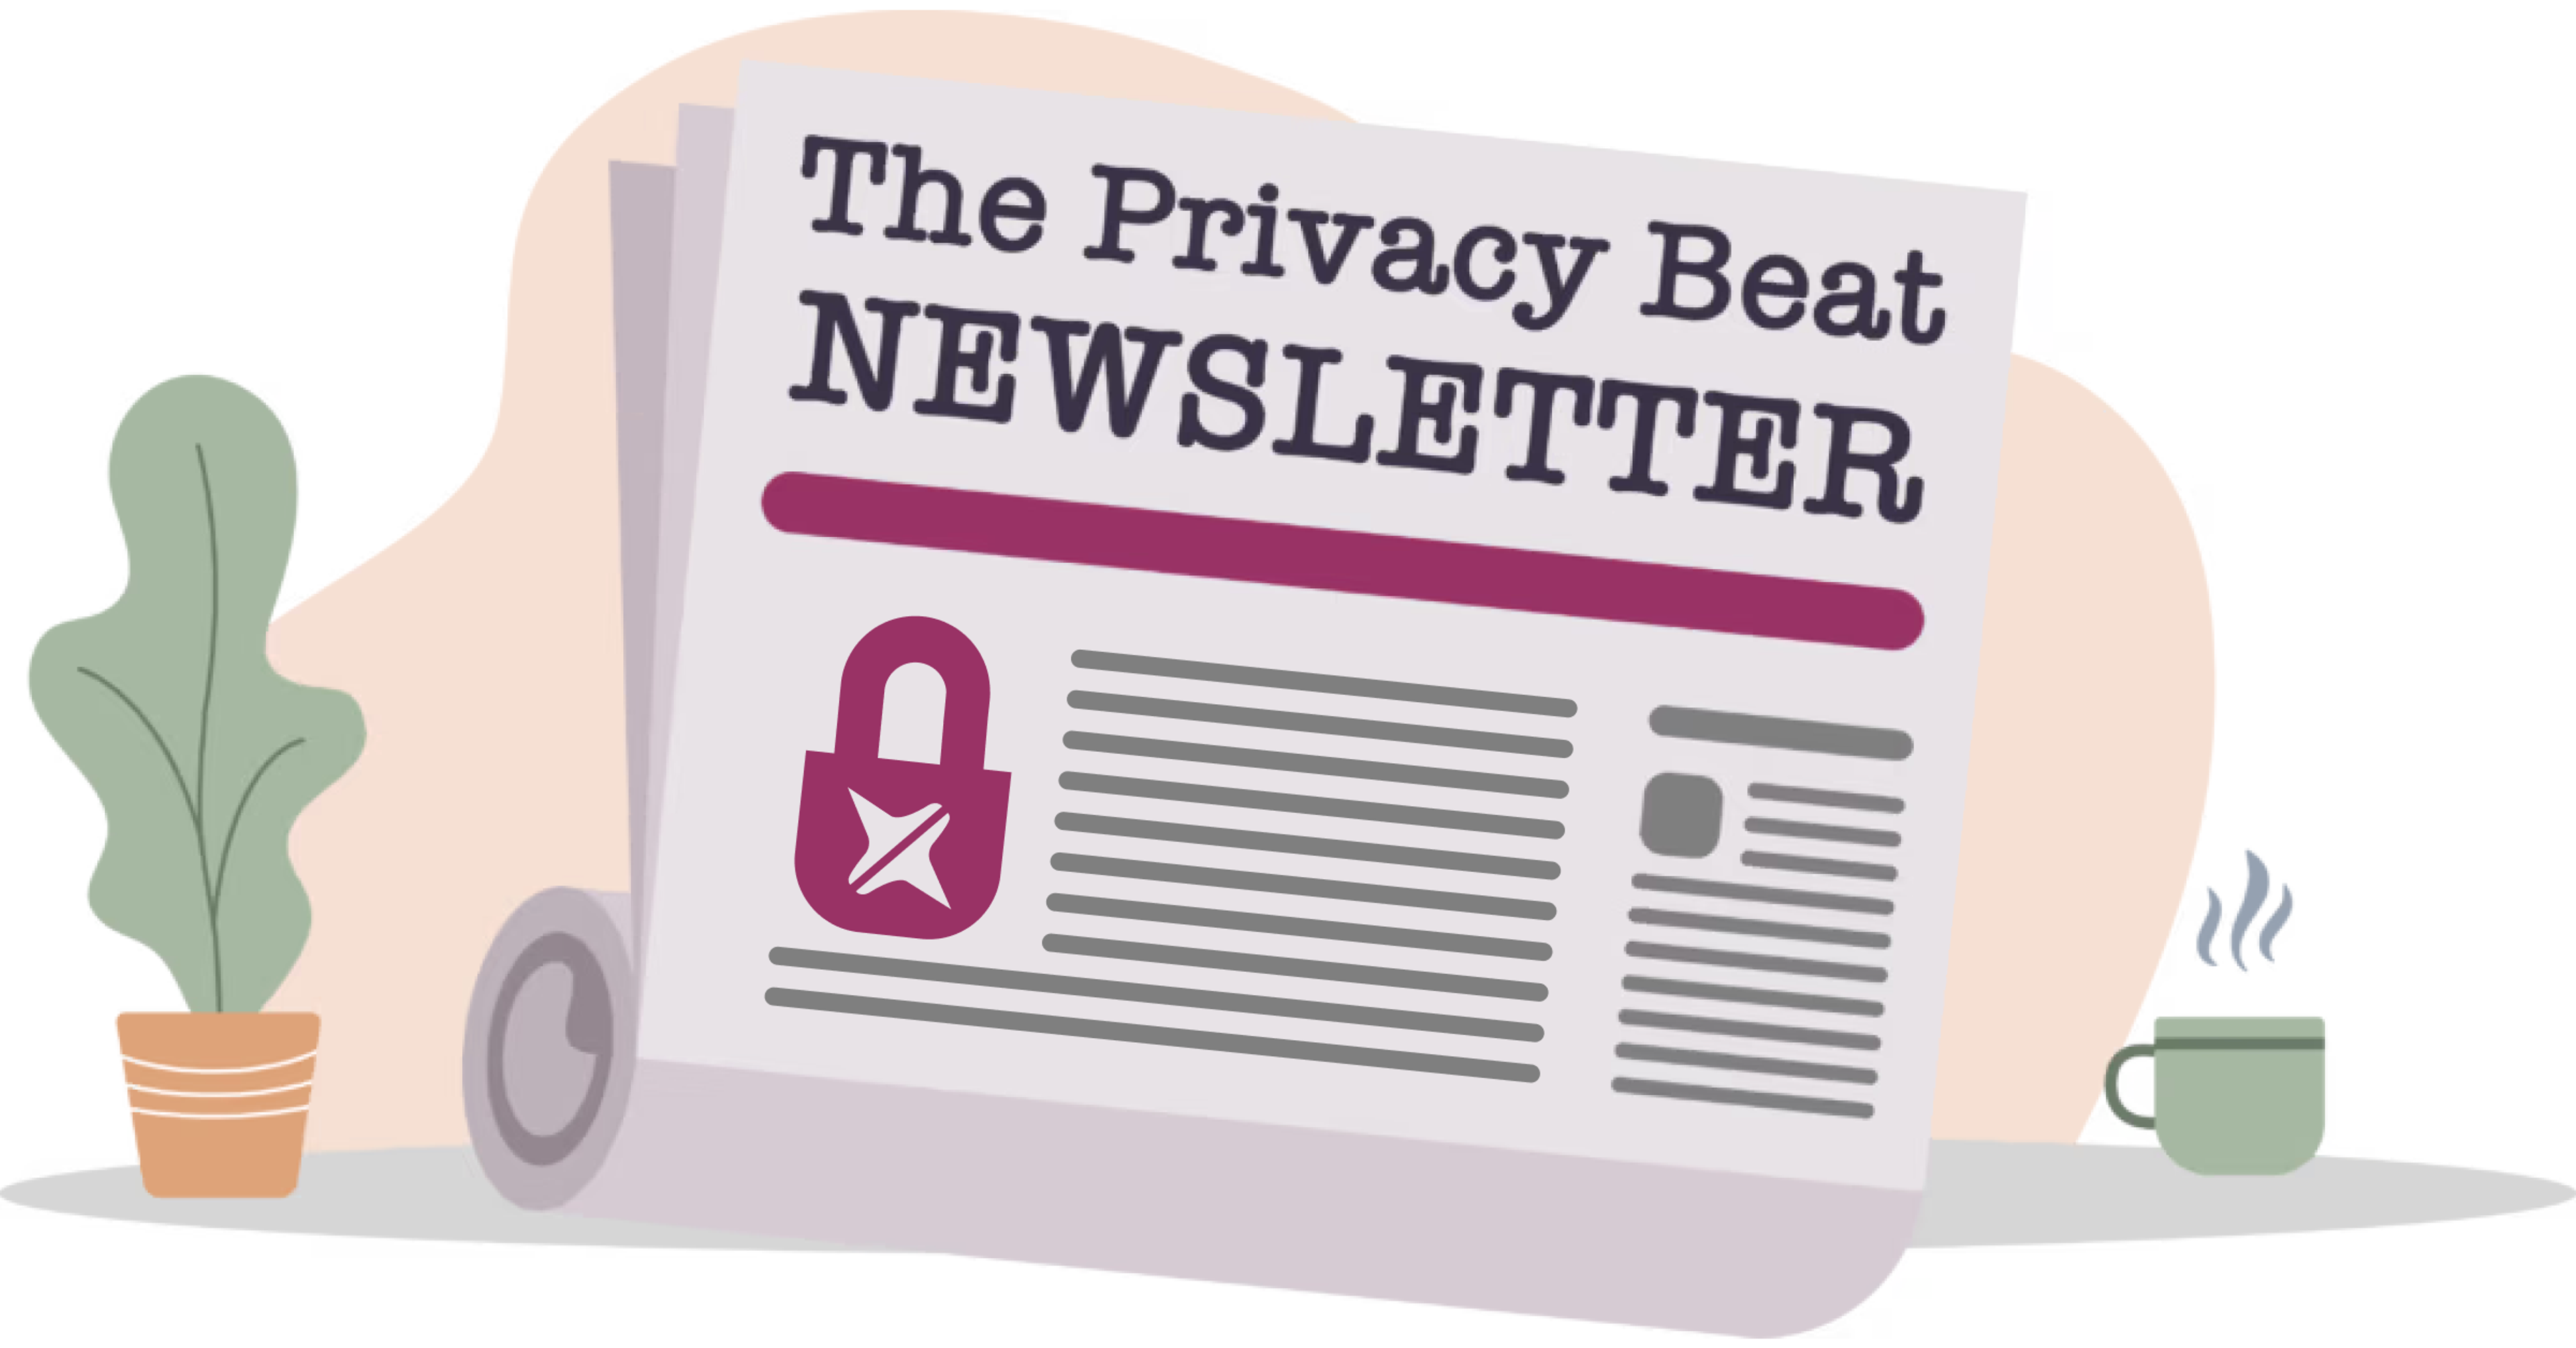 The Privacy Beat Newsletter